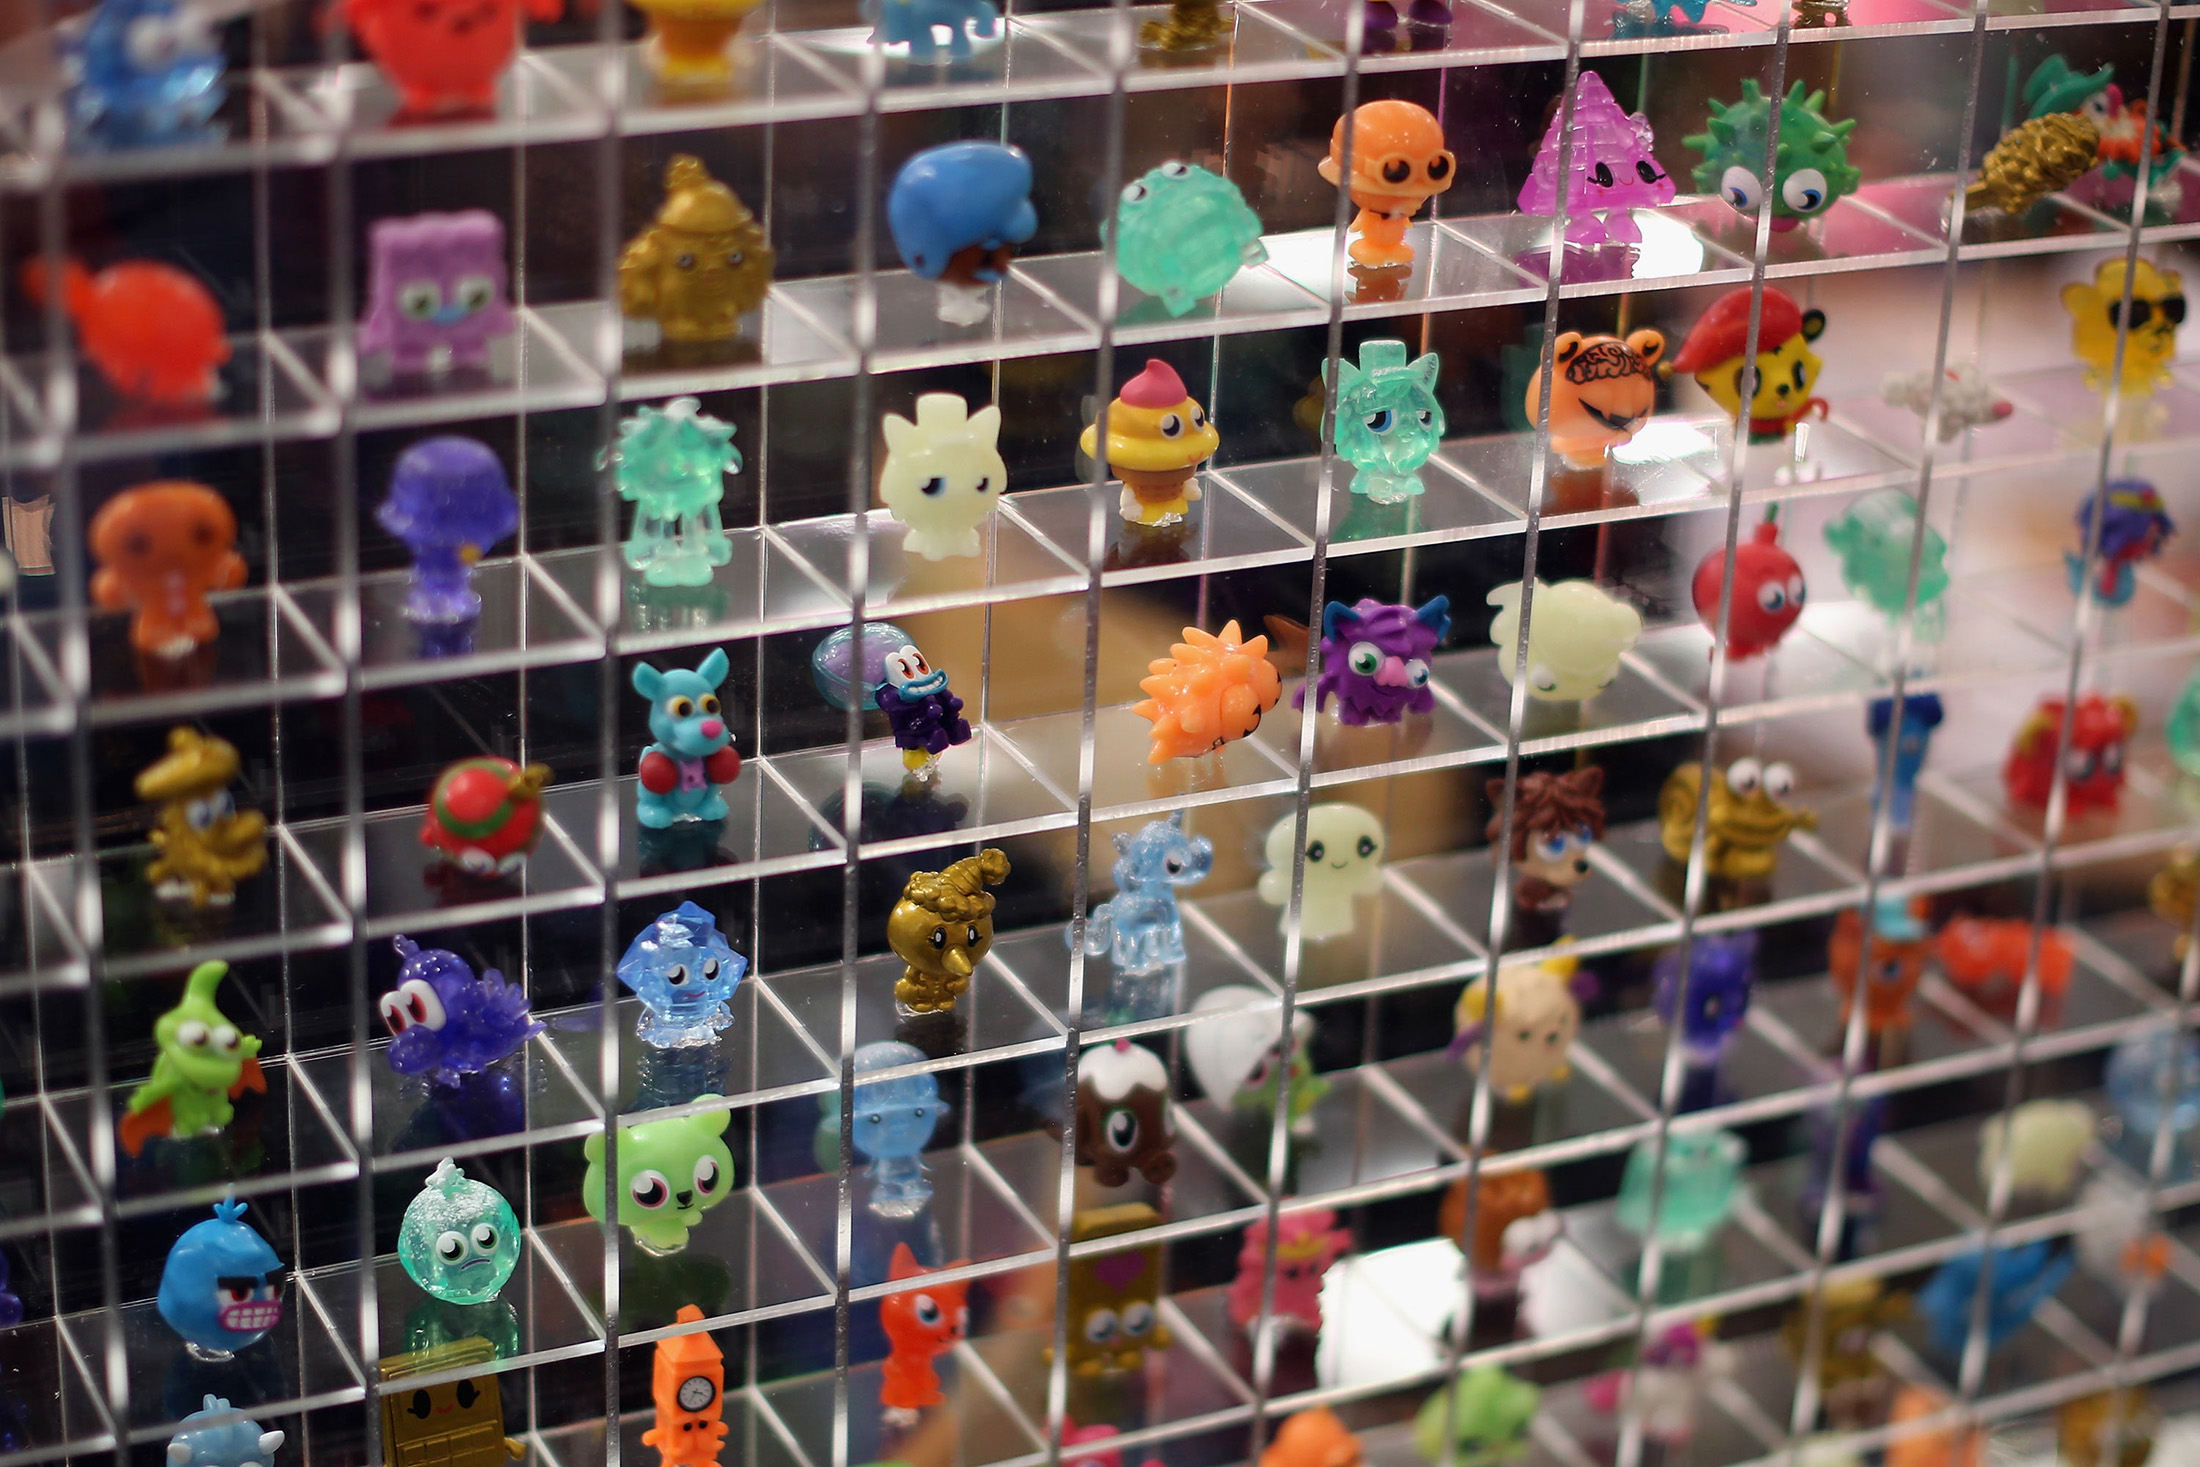 Moshi Monsters characters on display at the 2013 London Toy Fair in London on Jan. 22, 2013.
